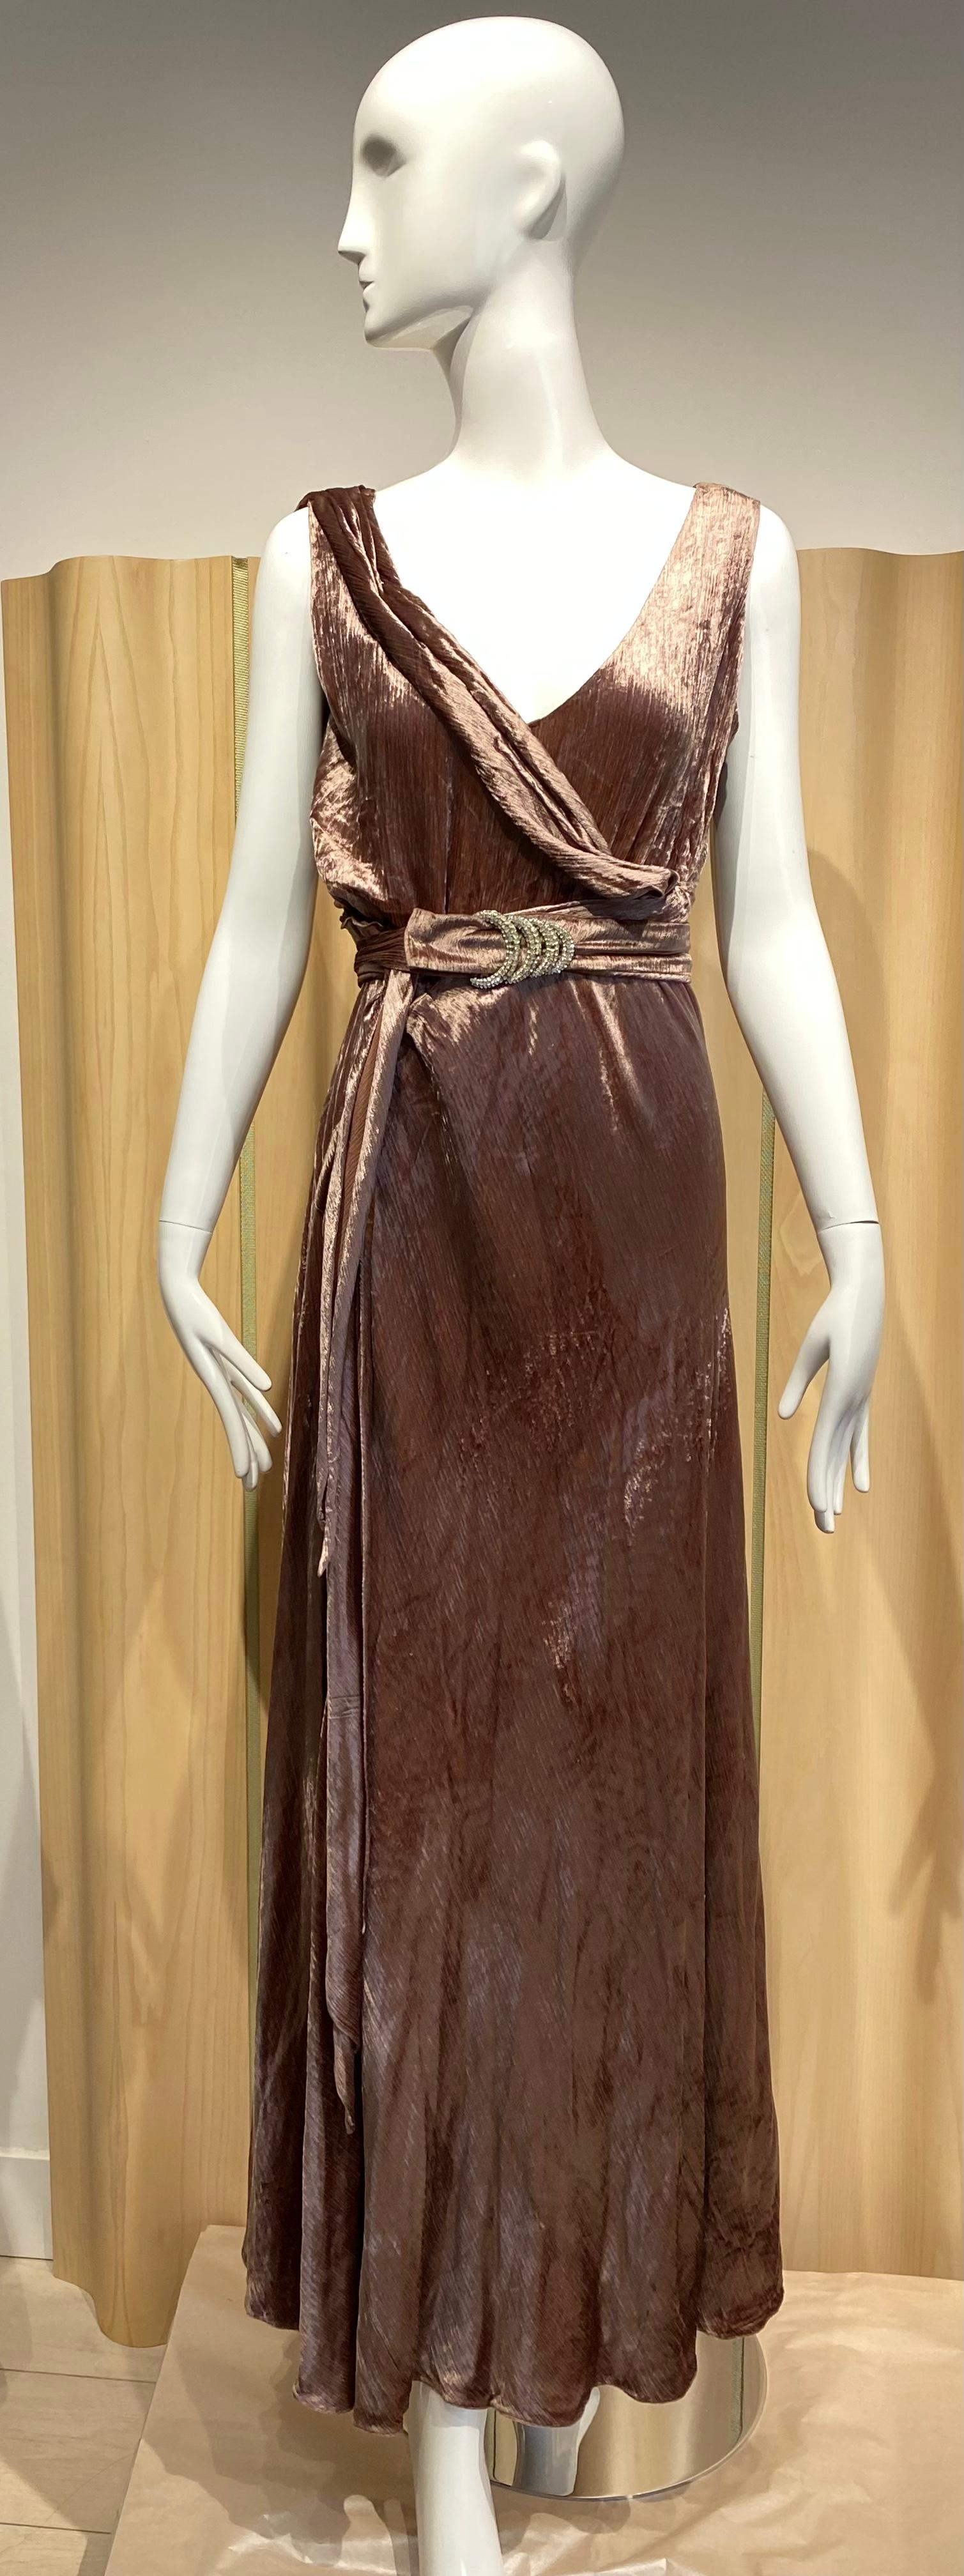 1930s mocha brown velvet sleeveless V neck cocktail dress with 3/4 sleeve capelet/ Jacket with faux fur trim.
Perfect for wedding or cocktail party.
Belt 
Fit US size 8

